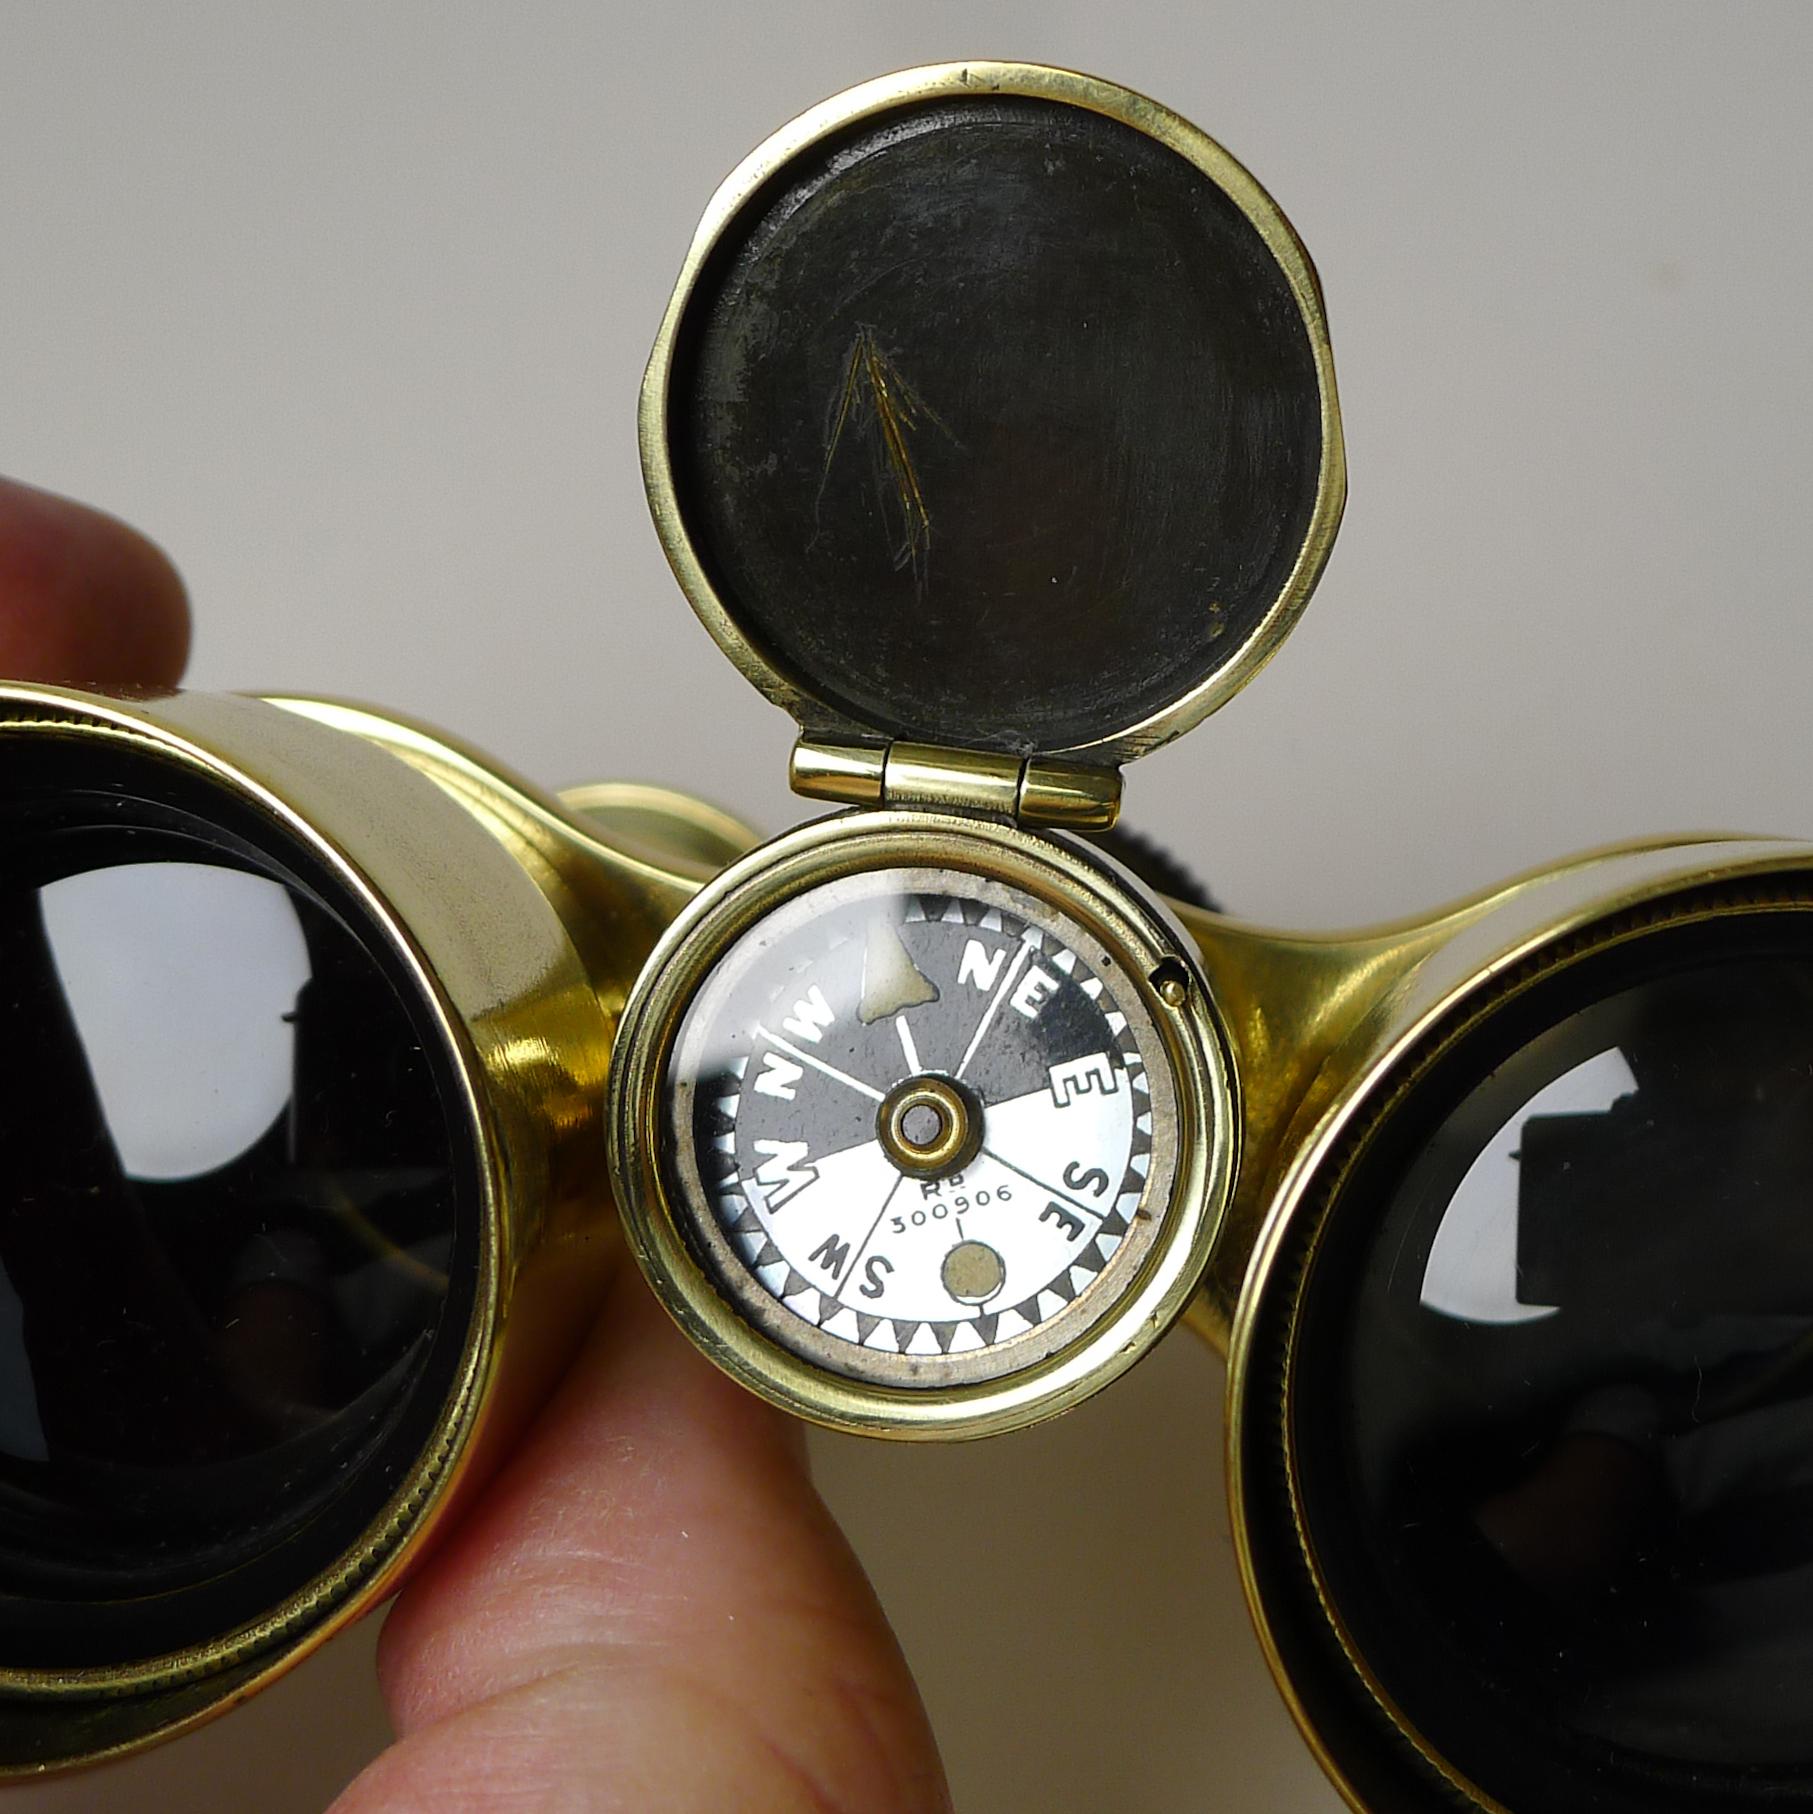 British Antique English Field Glasses / Binoculars by Lawrence and Mayo, with Compass